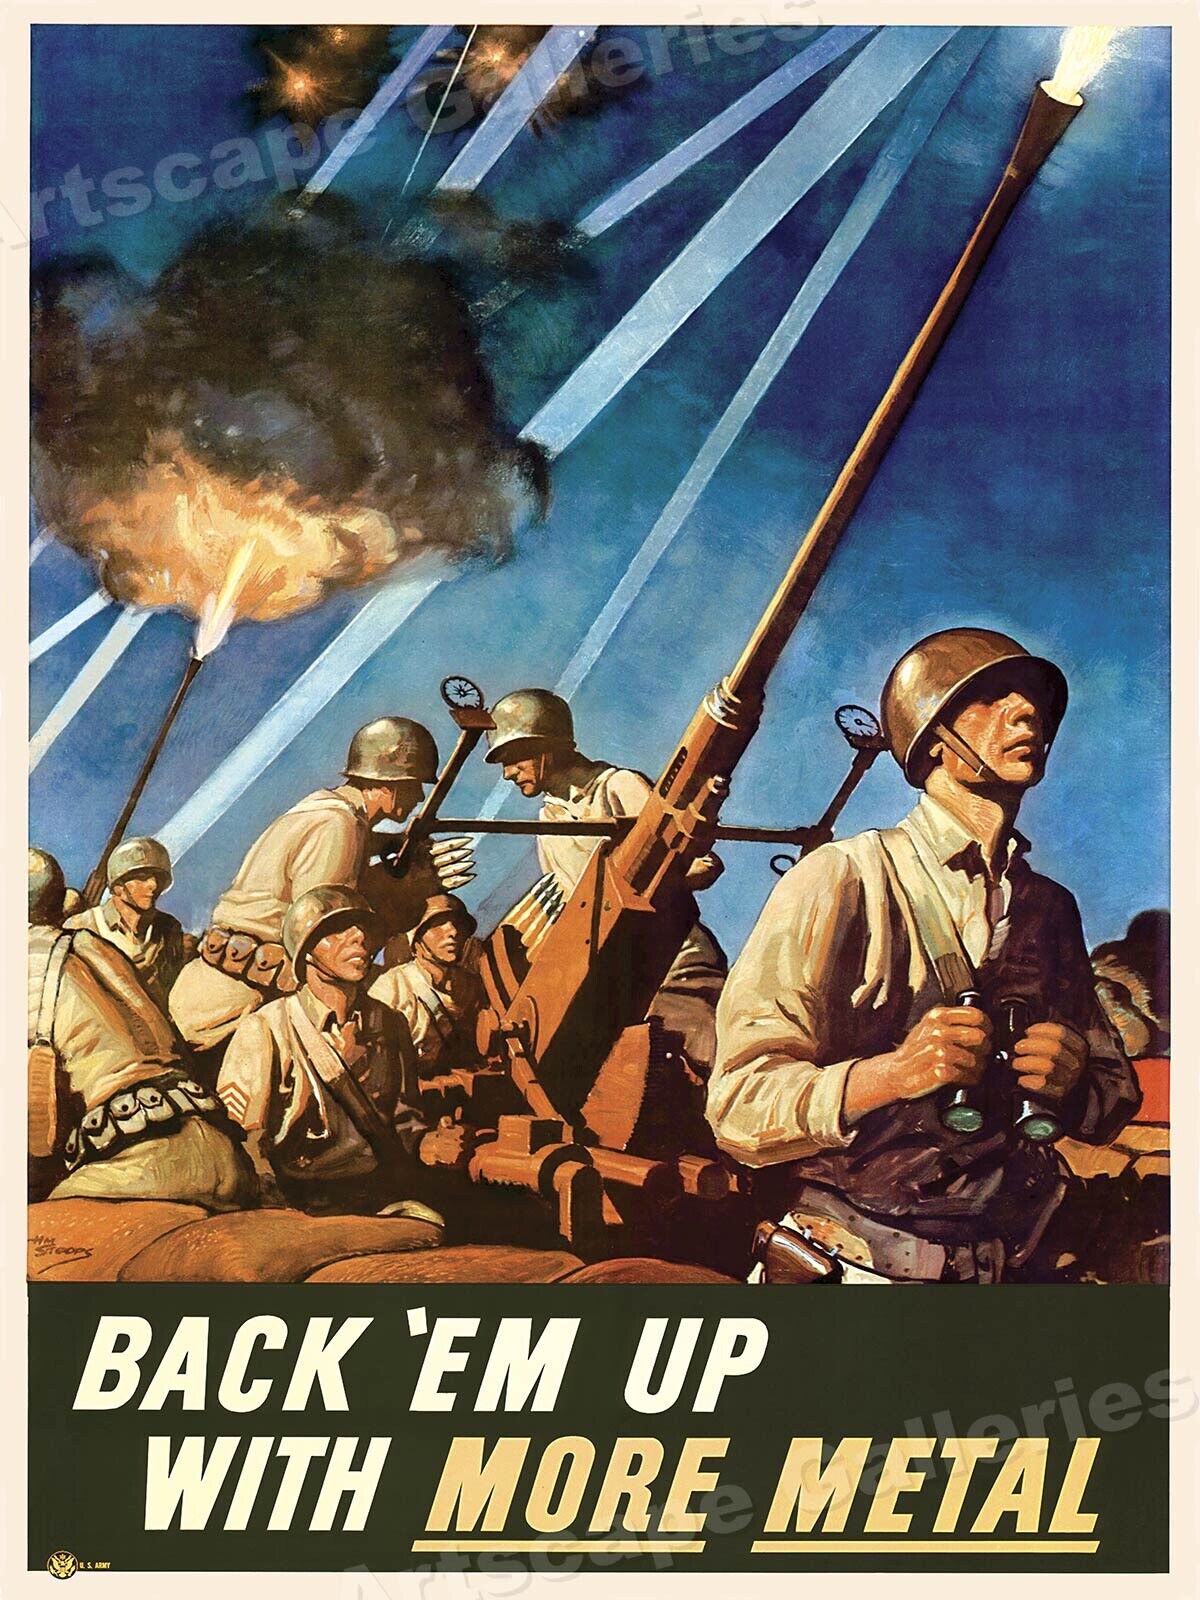 Back 'Em Up With More Metal 1942 Vintage Style WW2 Poster - 18x24